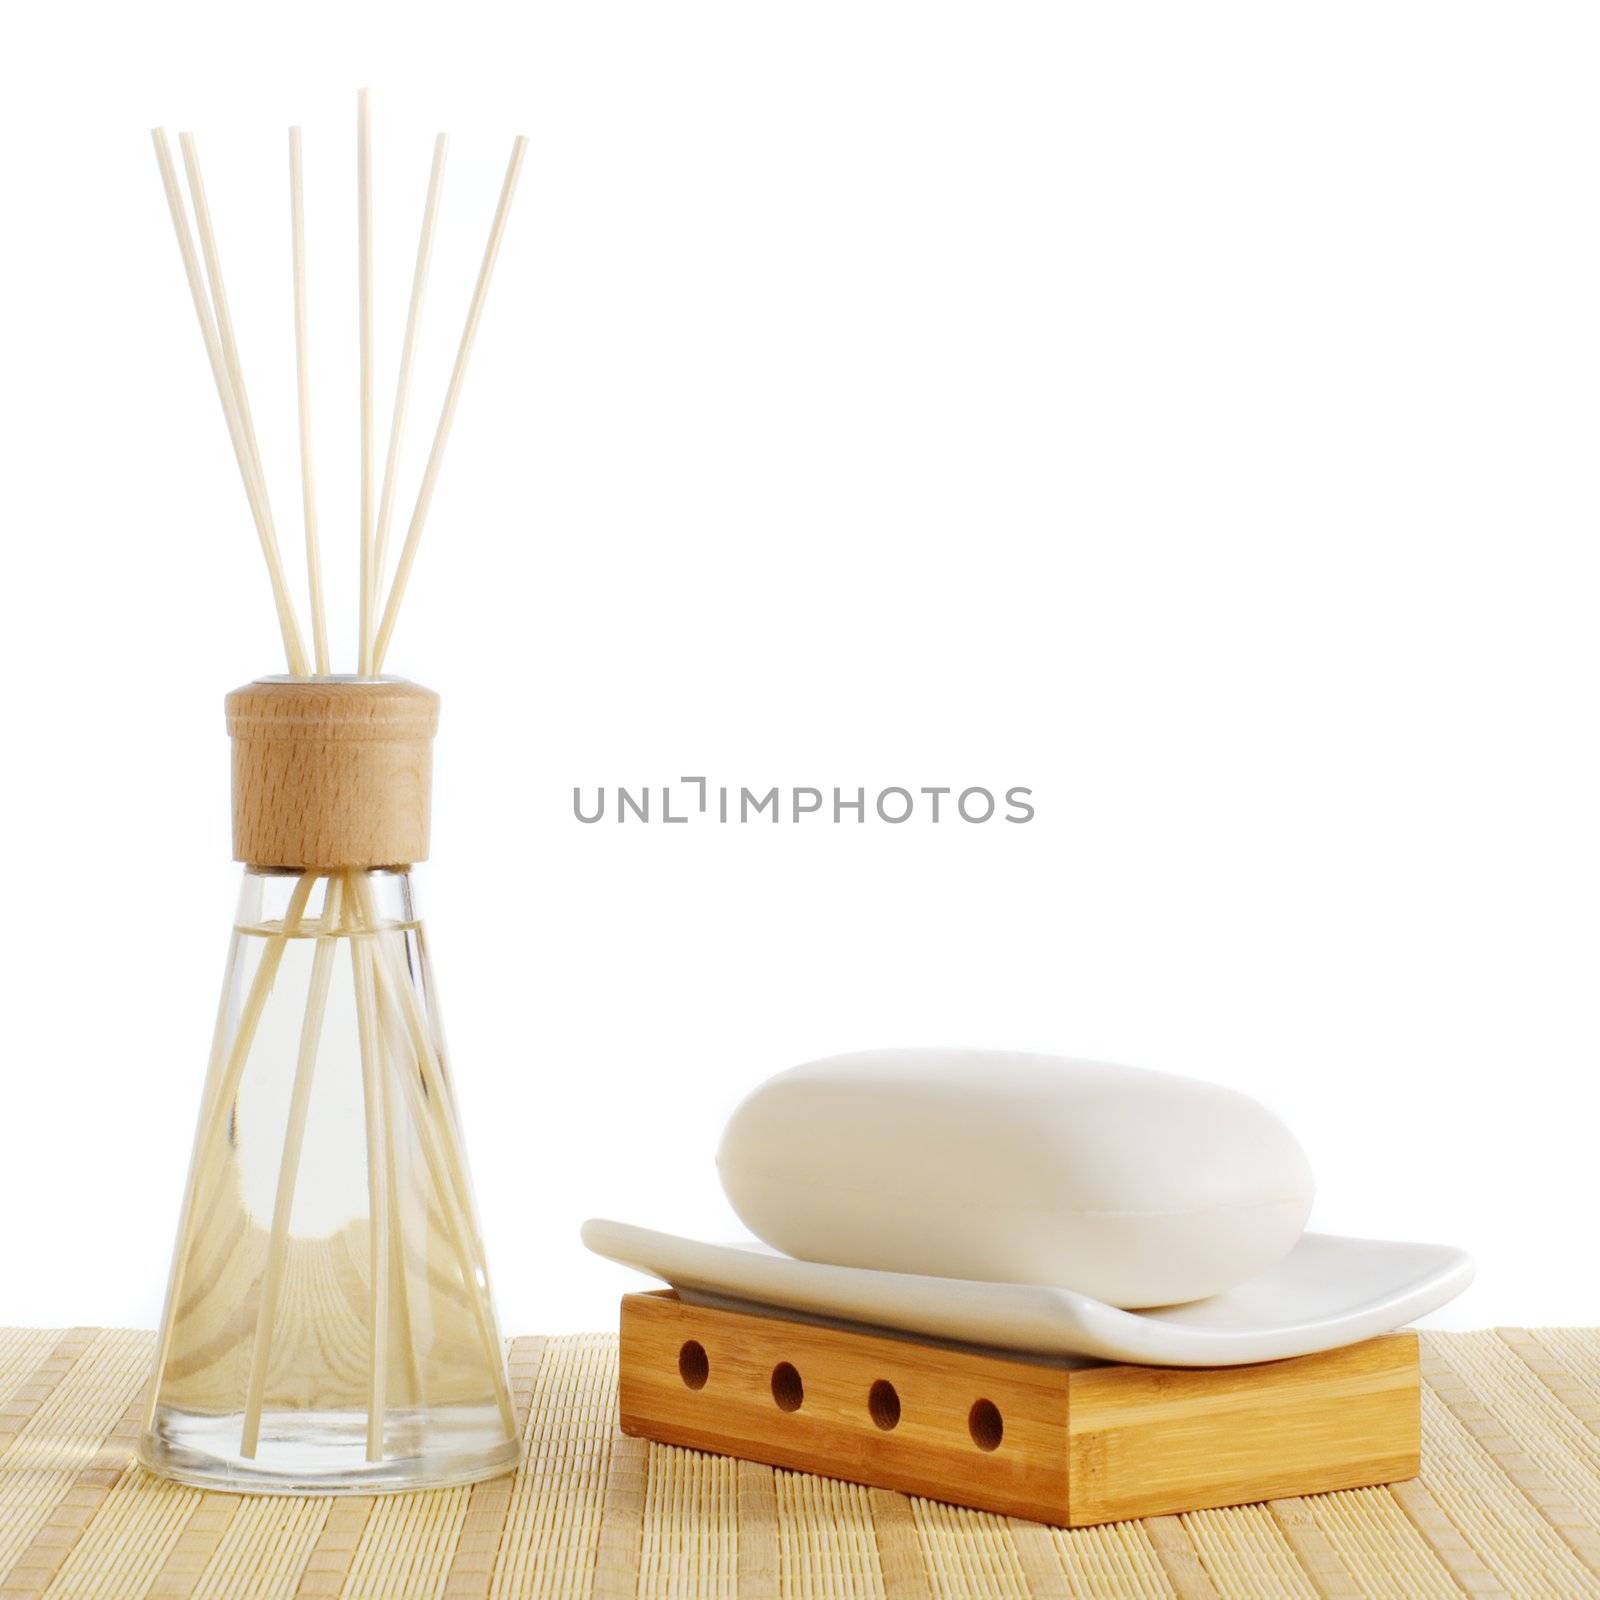 Reed diffuser and soap against a white background.